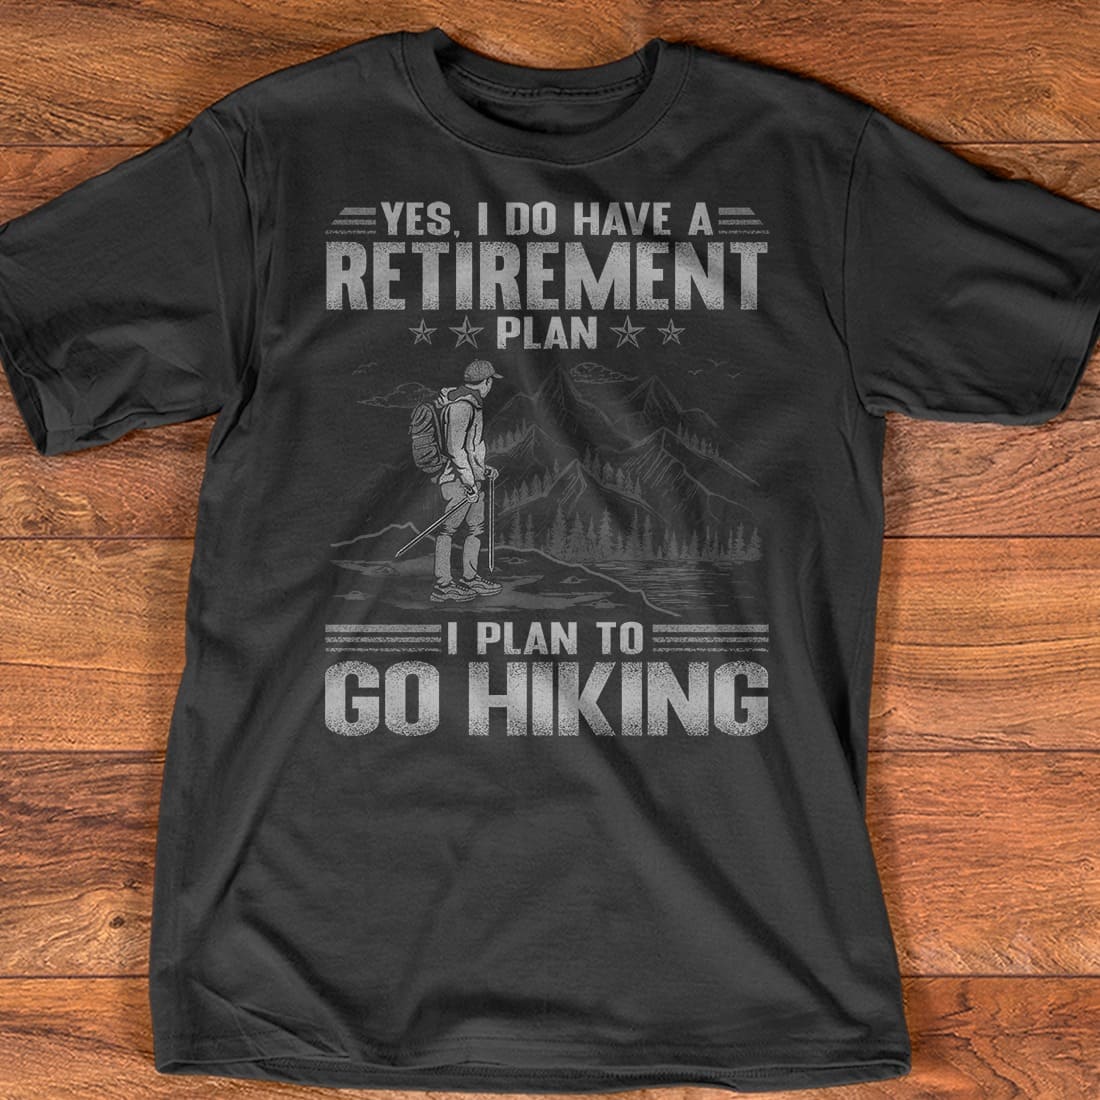 Yes I do have a retirement plan I plan to go hiking - Retired people T-shirt, hiking on the mountain